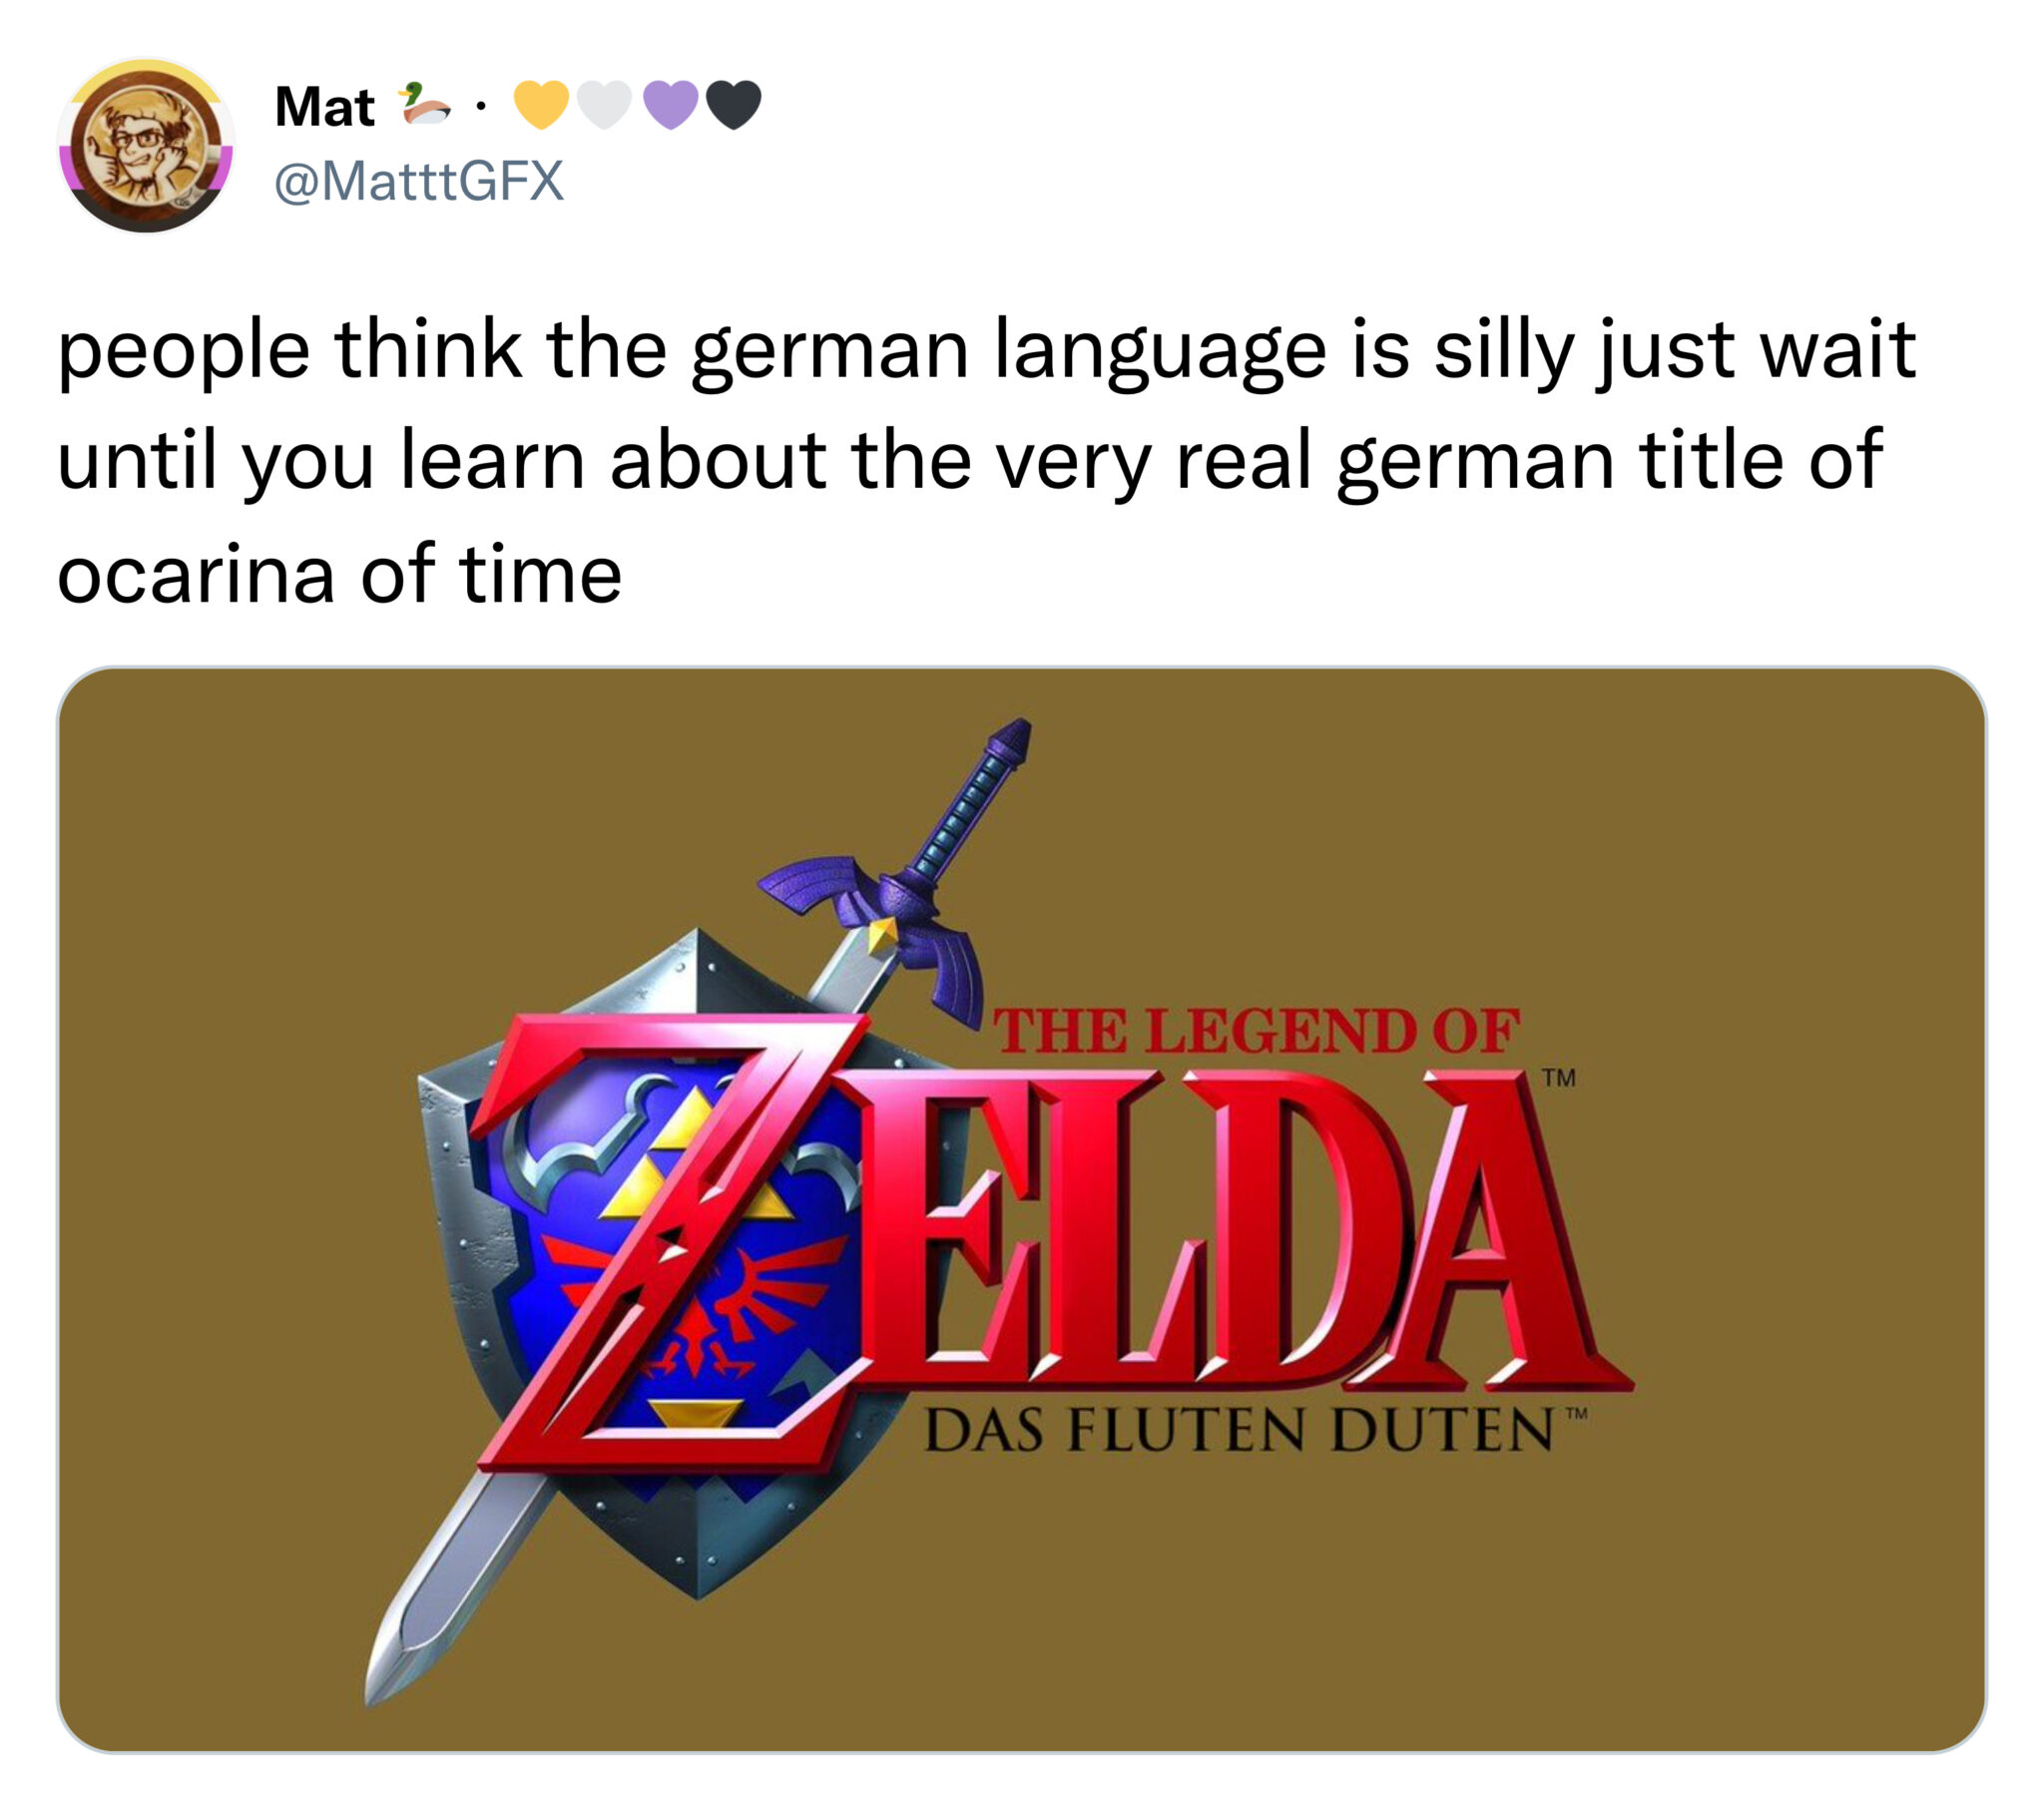 savage tweets - oot randomizer - Mat 2. people think the german language is silly just wait until you learn about the very real german title of ocarina of time The Legend Of Elda Das Fluten Duten Tm